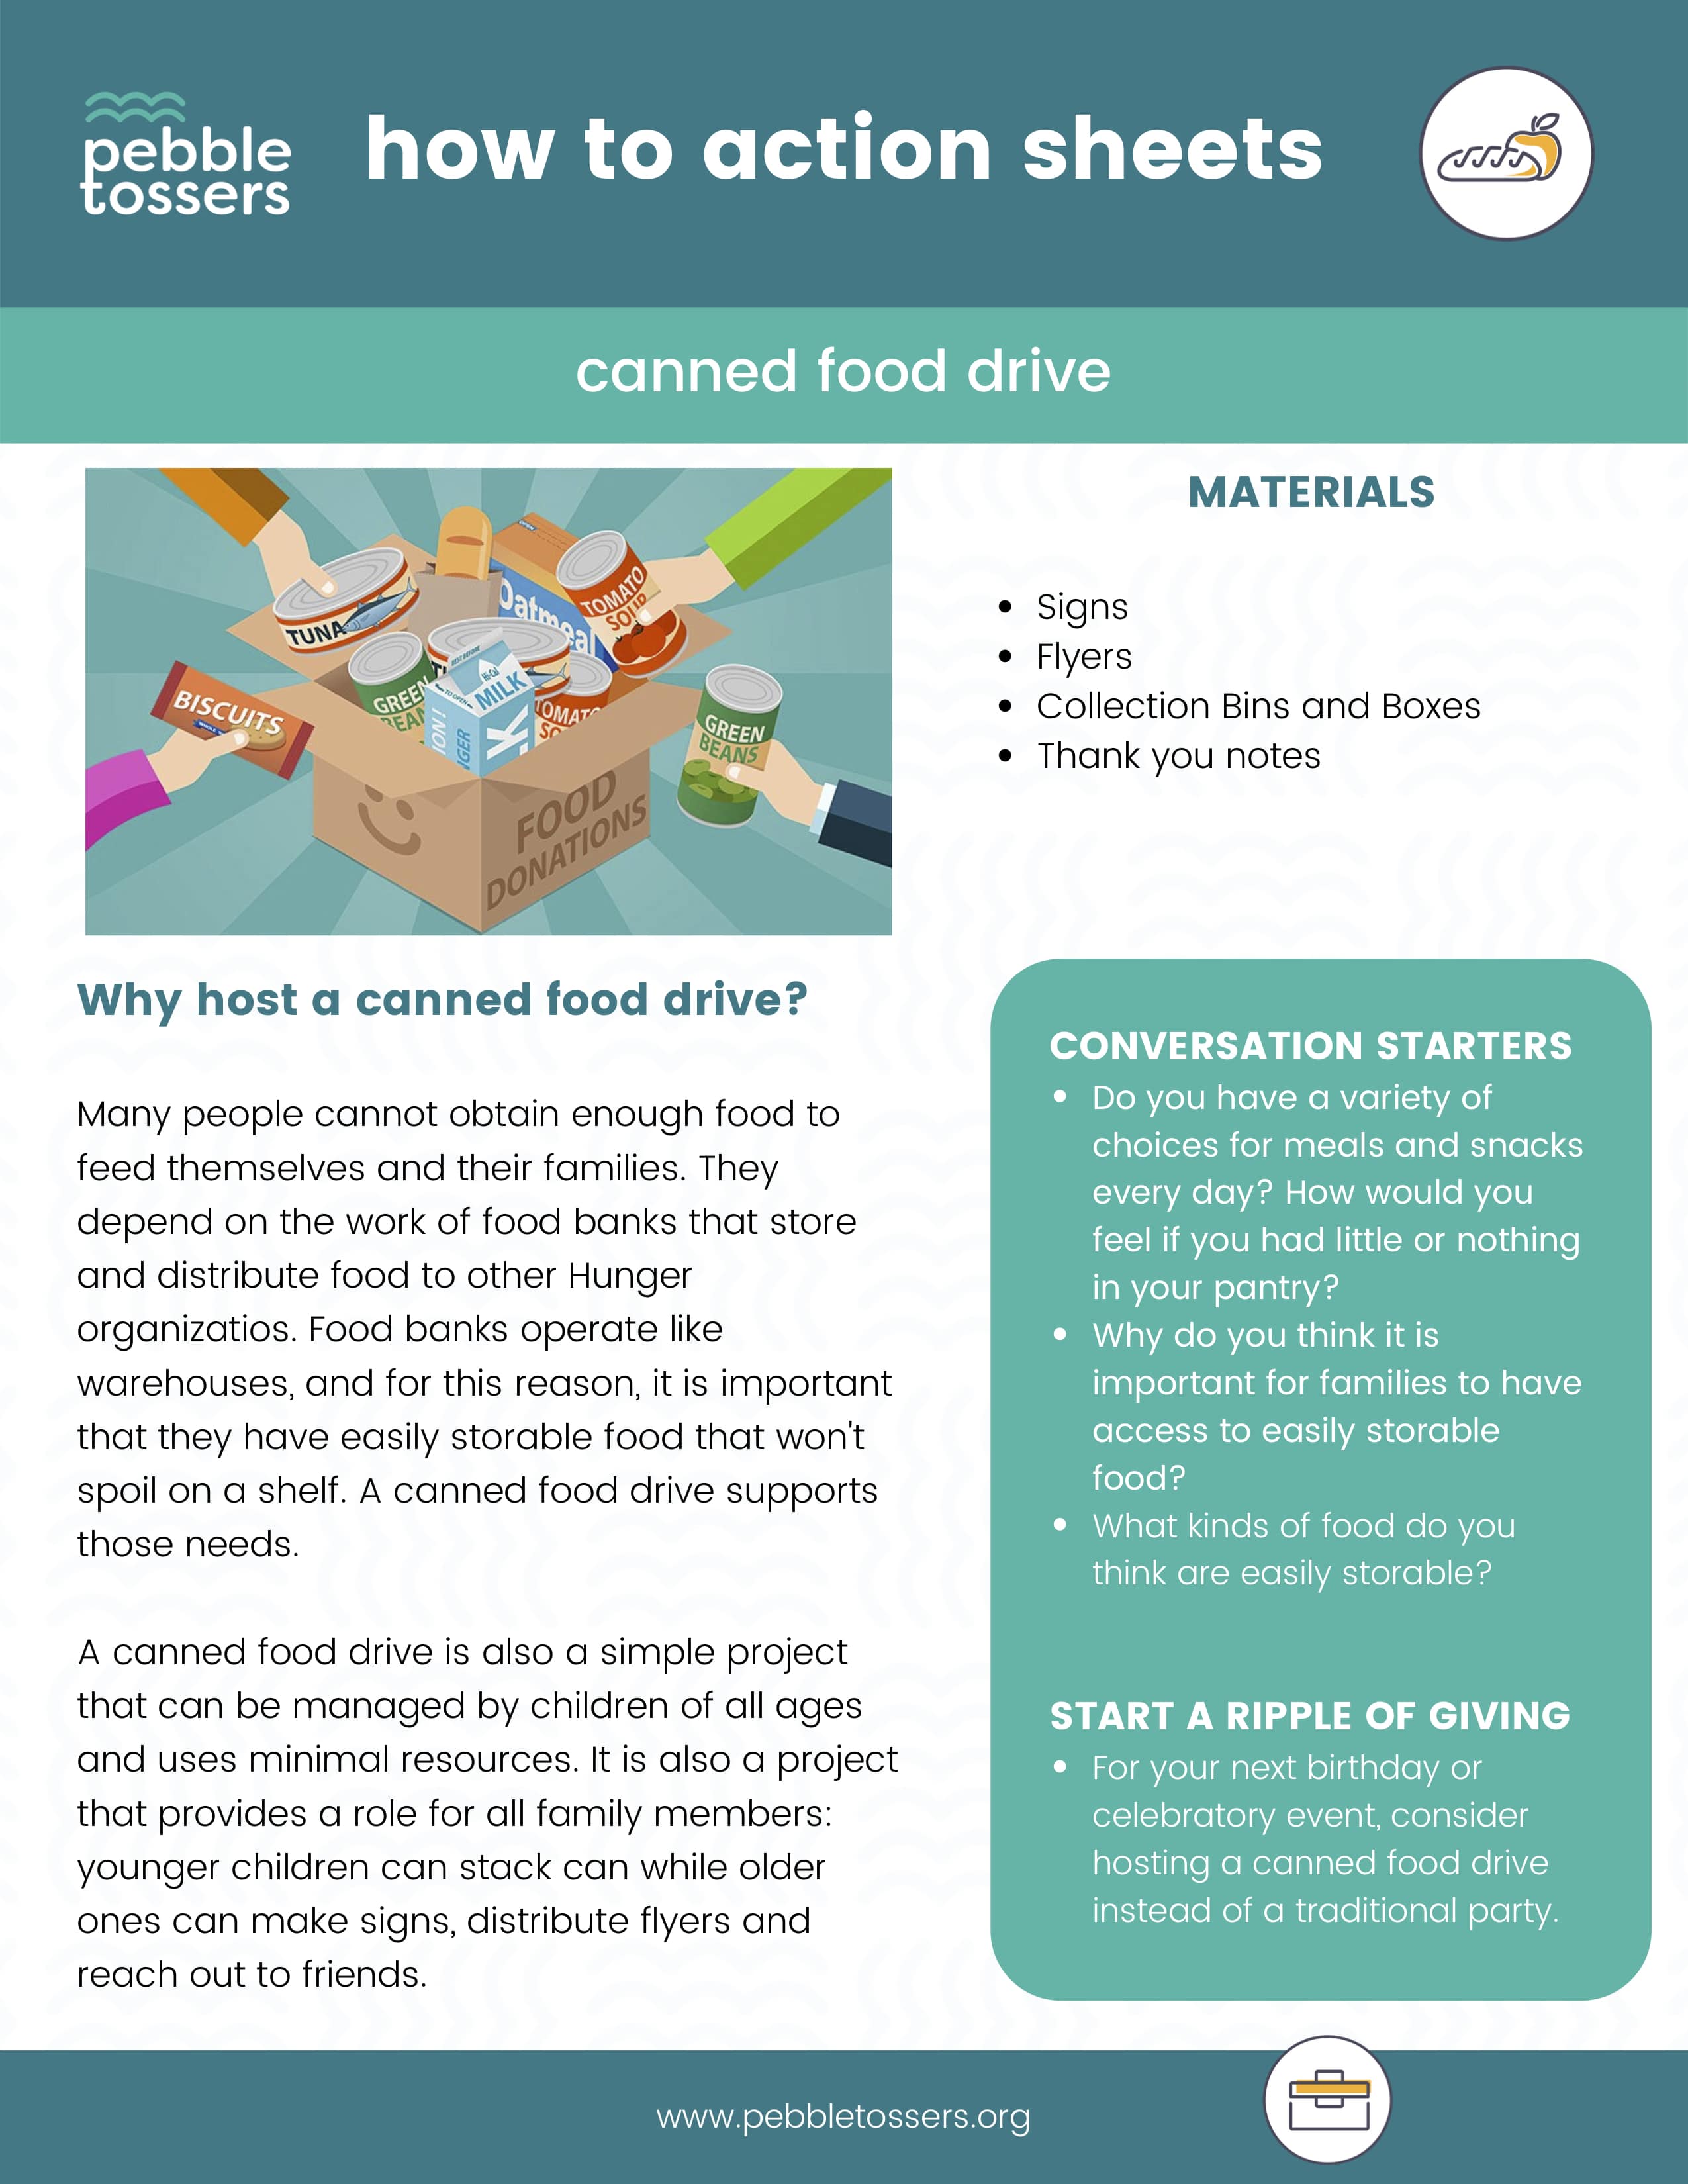 how to guide for hosting a canned food drive